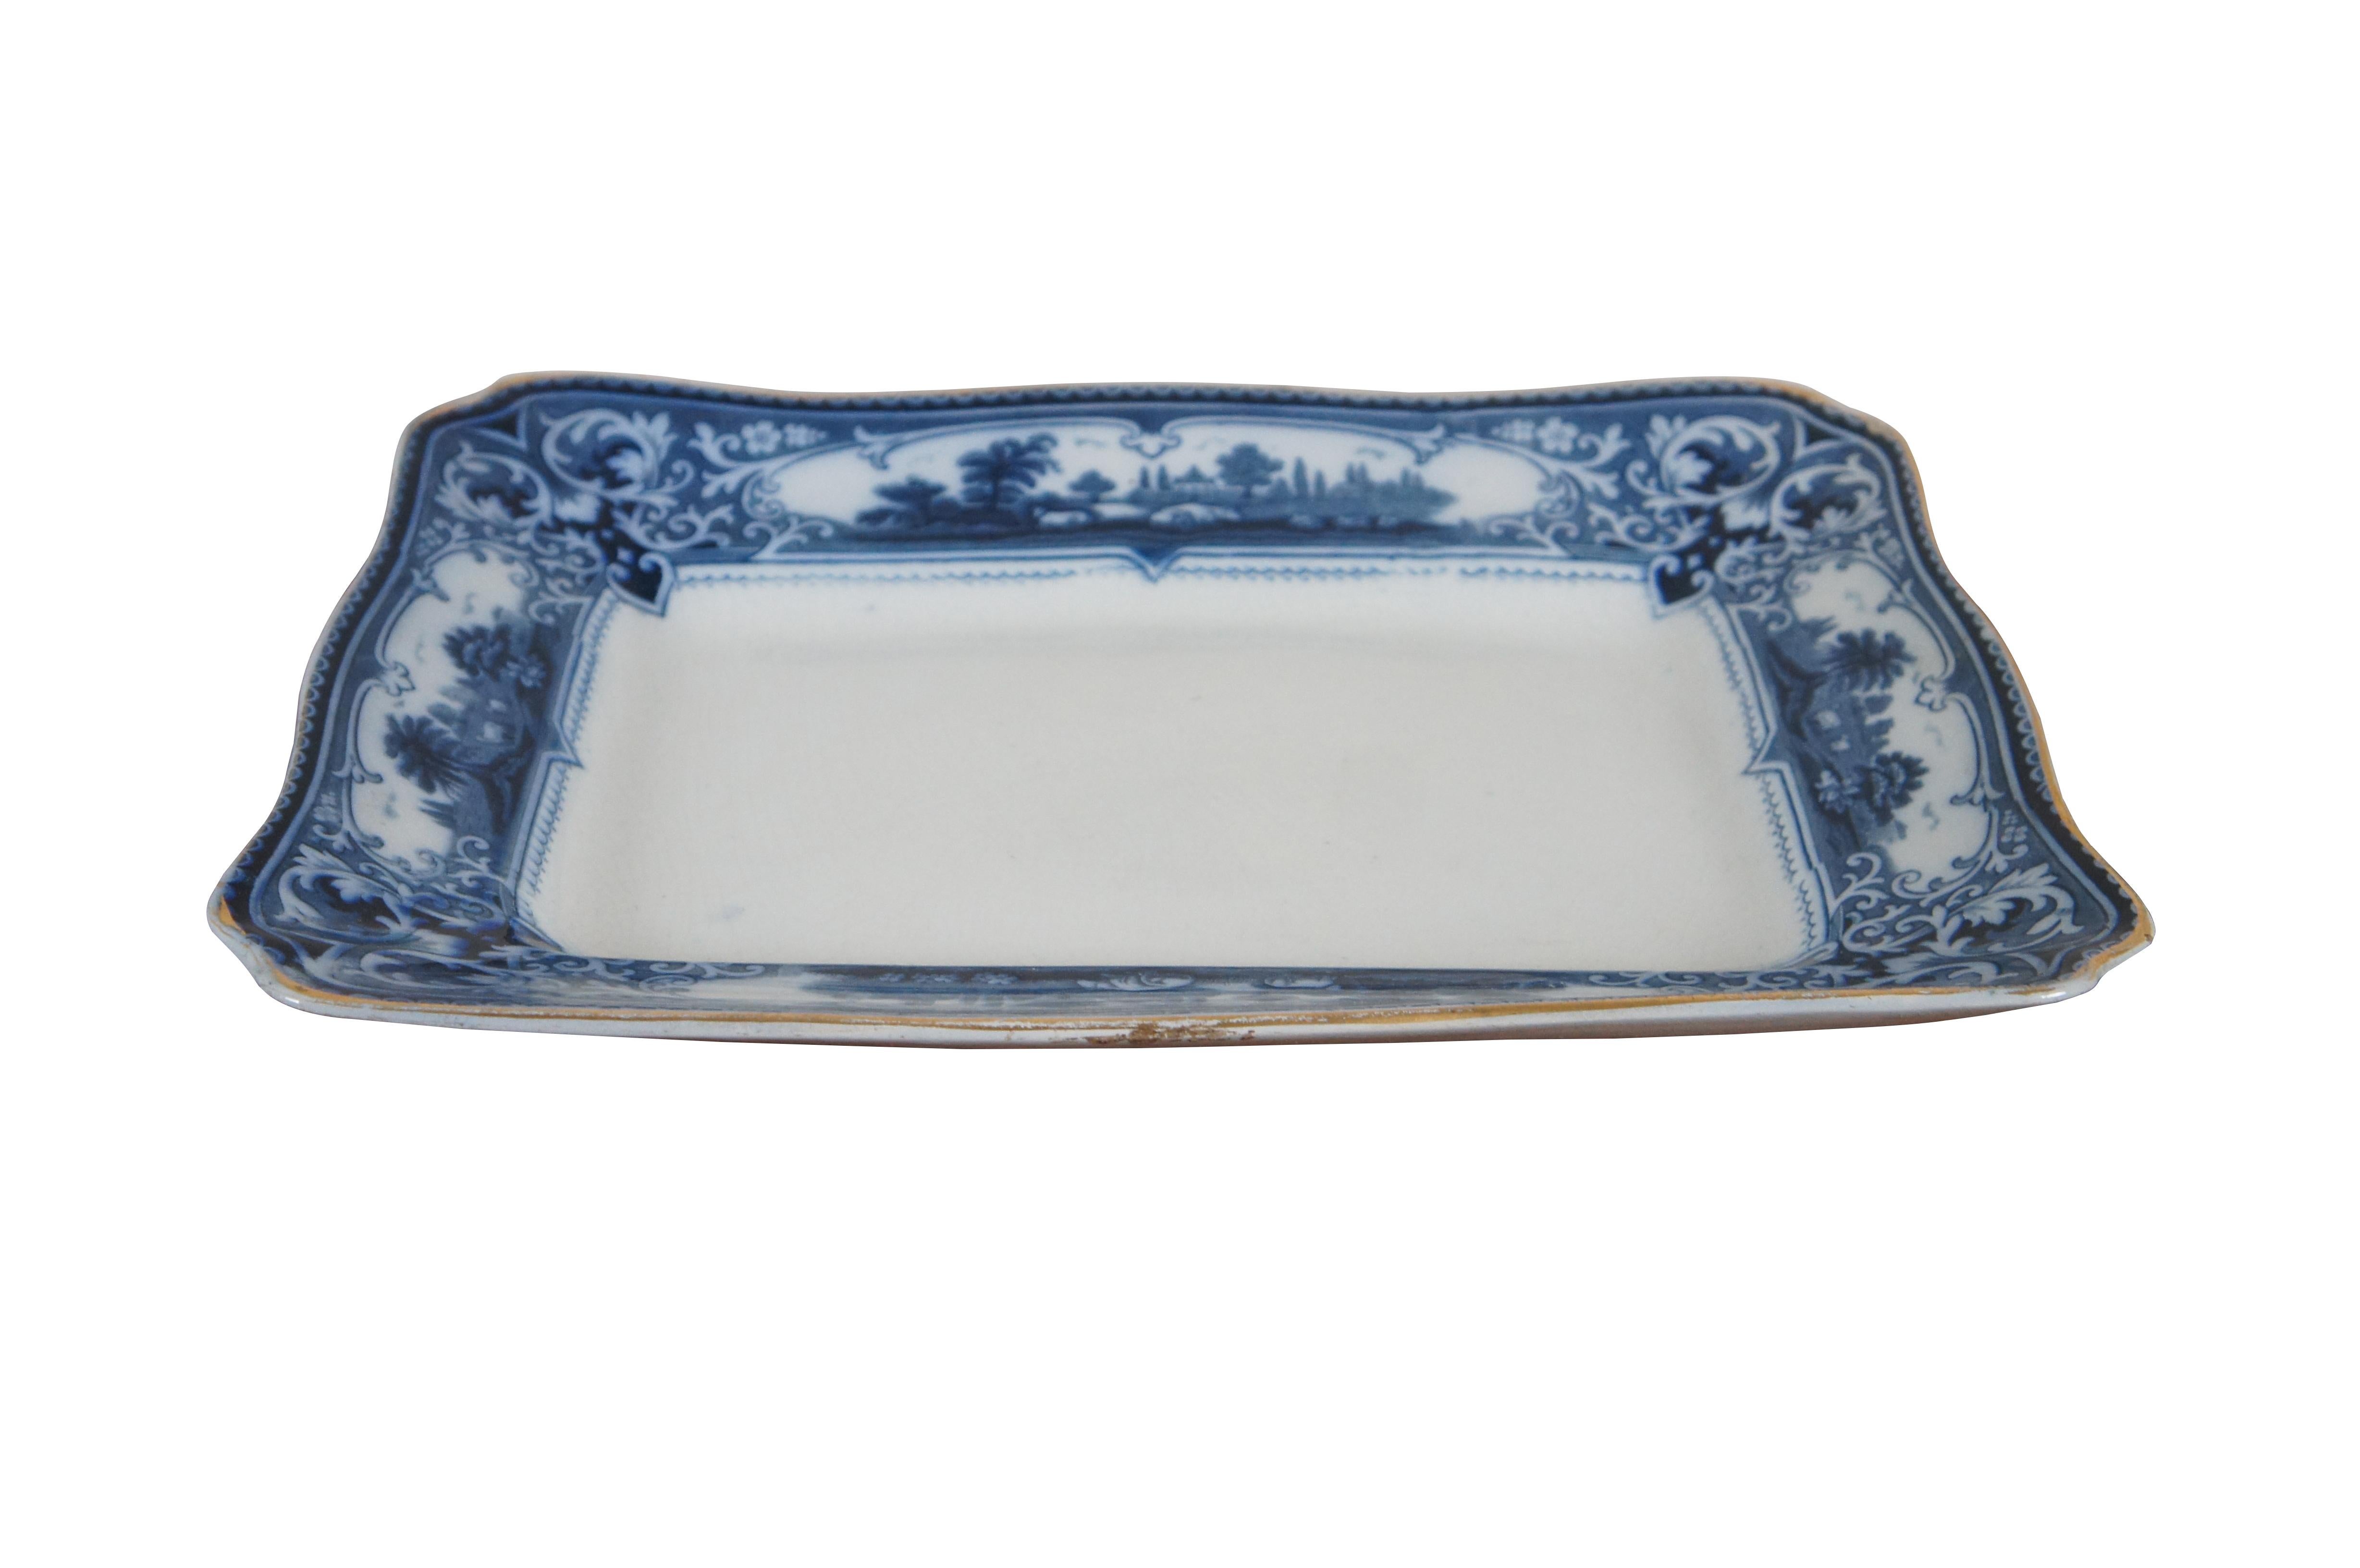 Large antique circa 1908-1913 Ford and Sons Ltd of Burslem, England Verona pattern ceramic serving platter featuring a slightly scalloped rectangular shape, gilded edges, and a blue transferware including floral and foliate designs framing pastoral